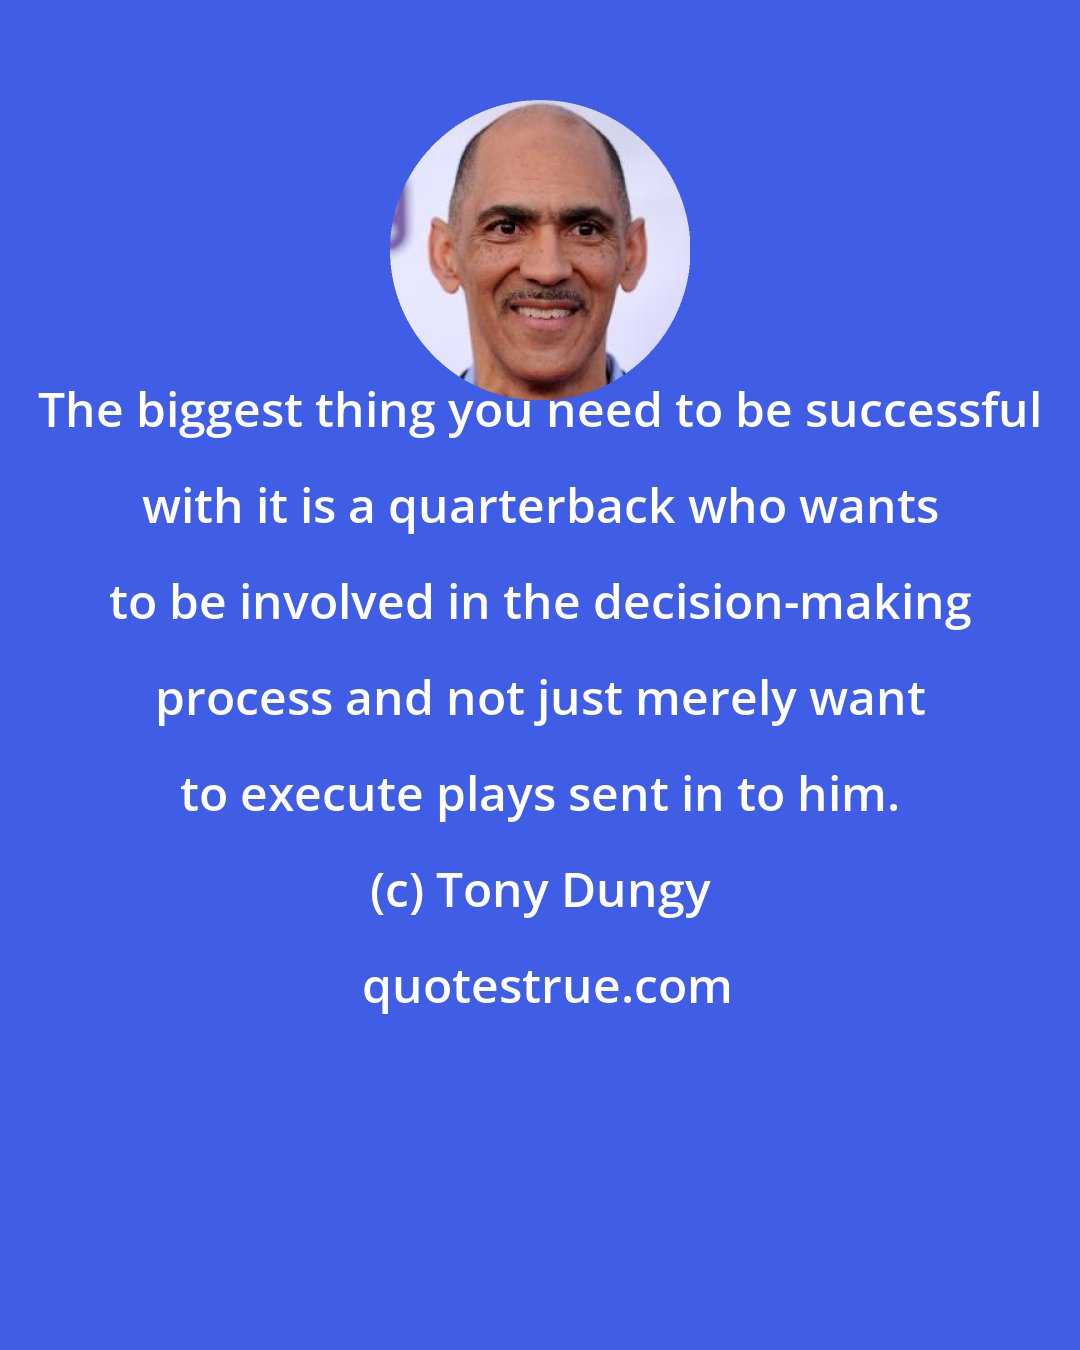 Tony Dungy: The biggest thing you need to be successful with it is a quarterback who wants to be involved in the decision-making process and not just merely want to execute plays sent in to him.